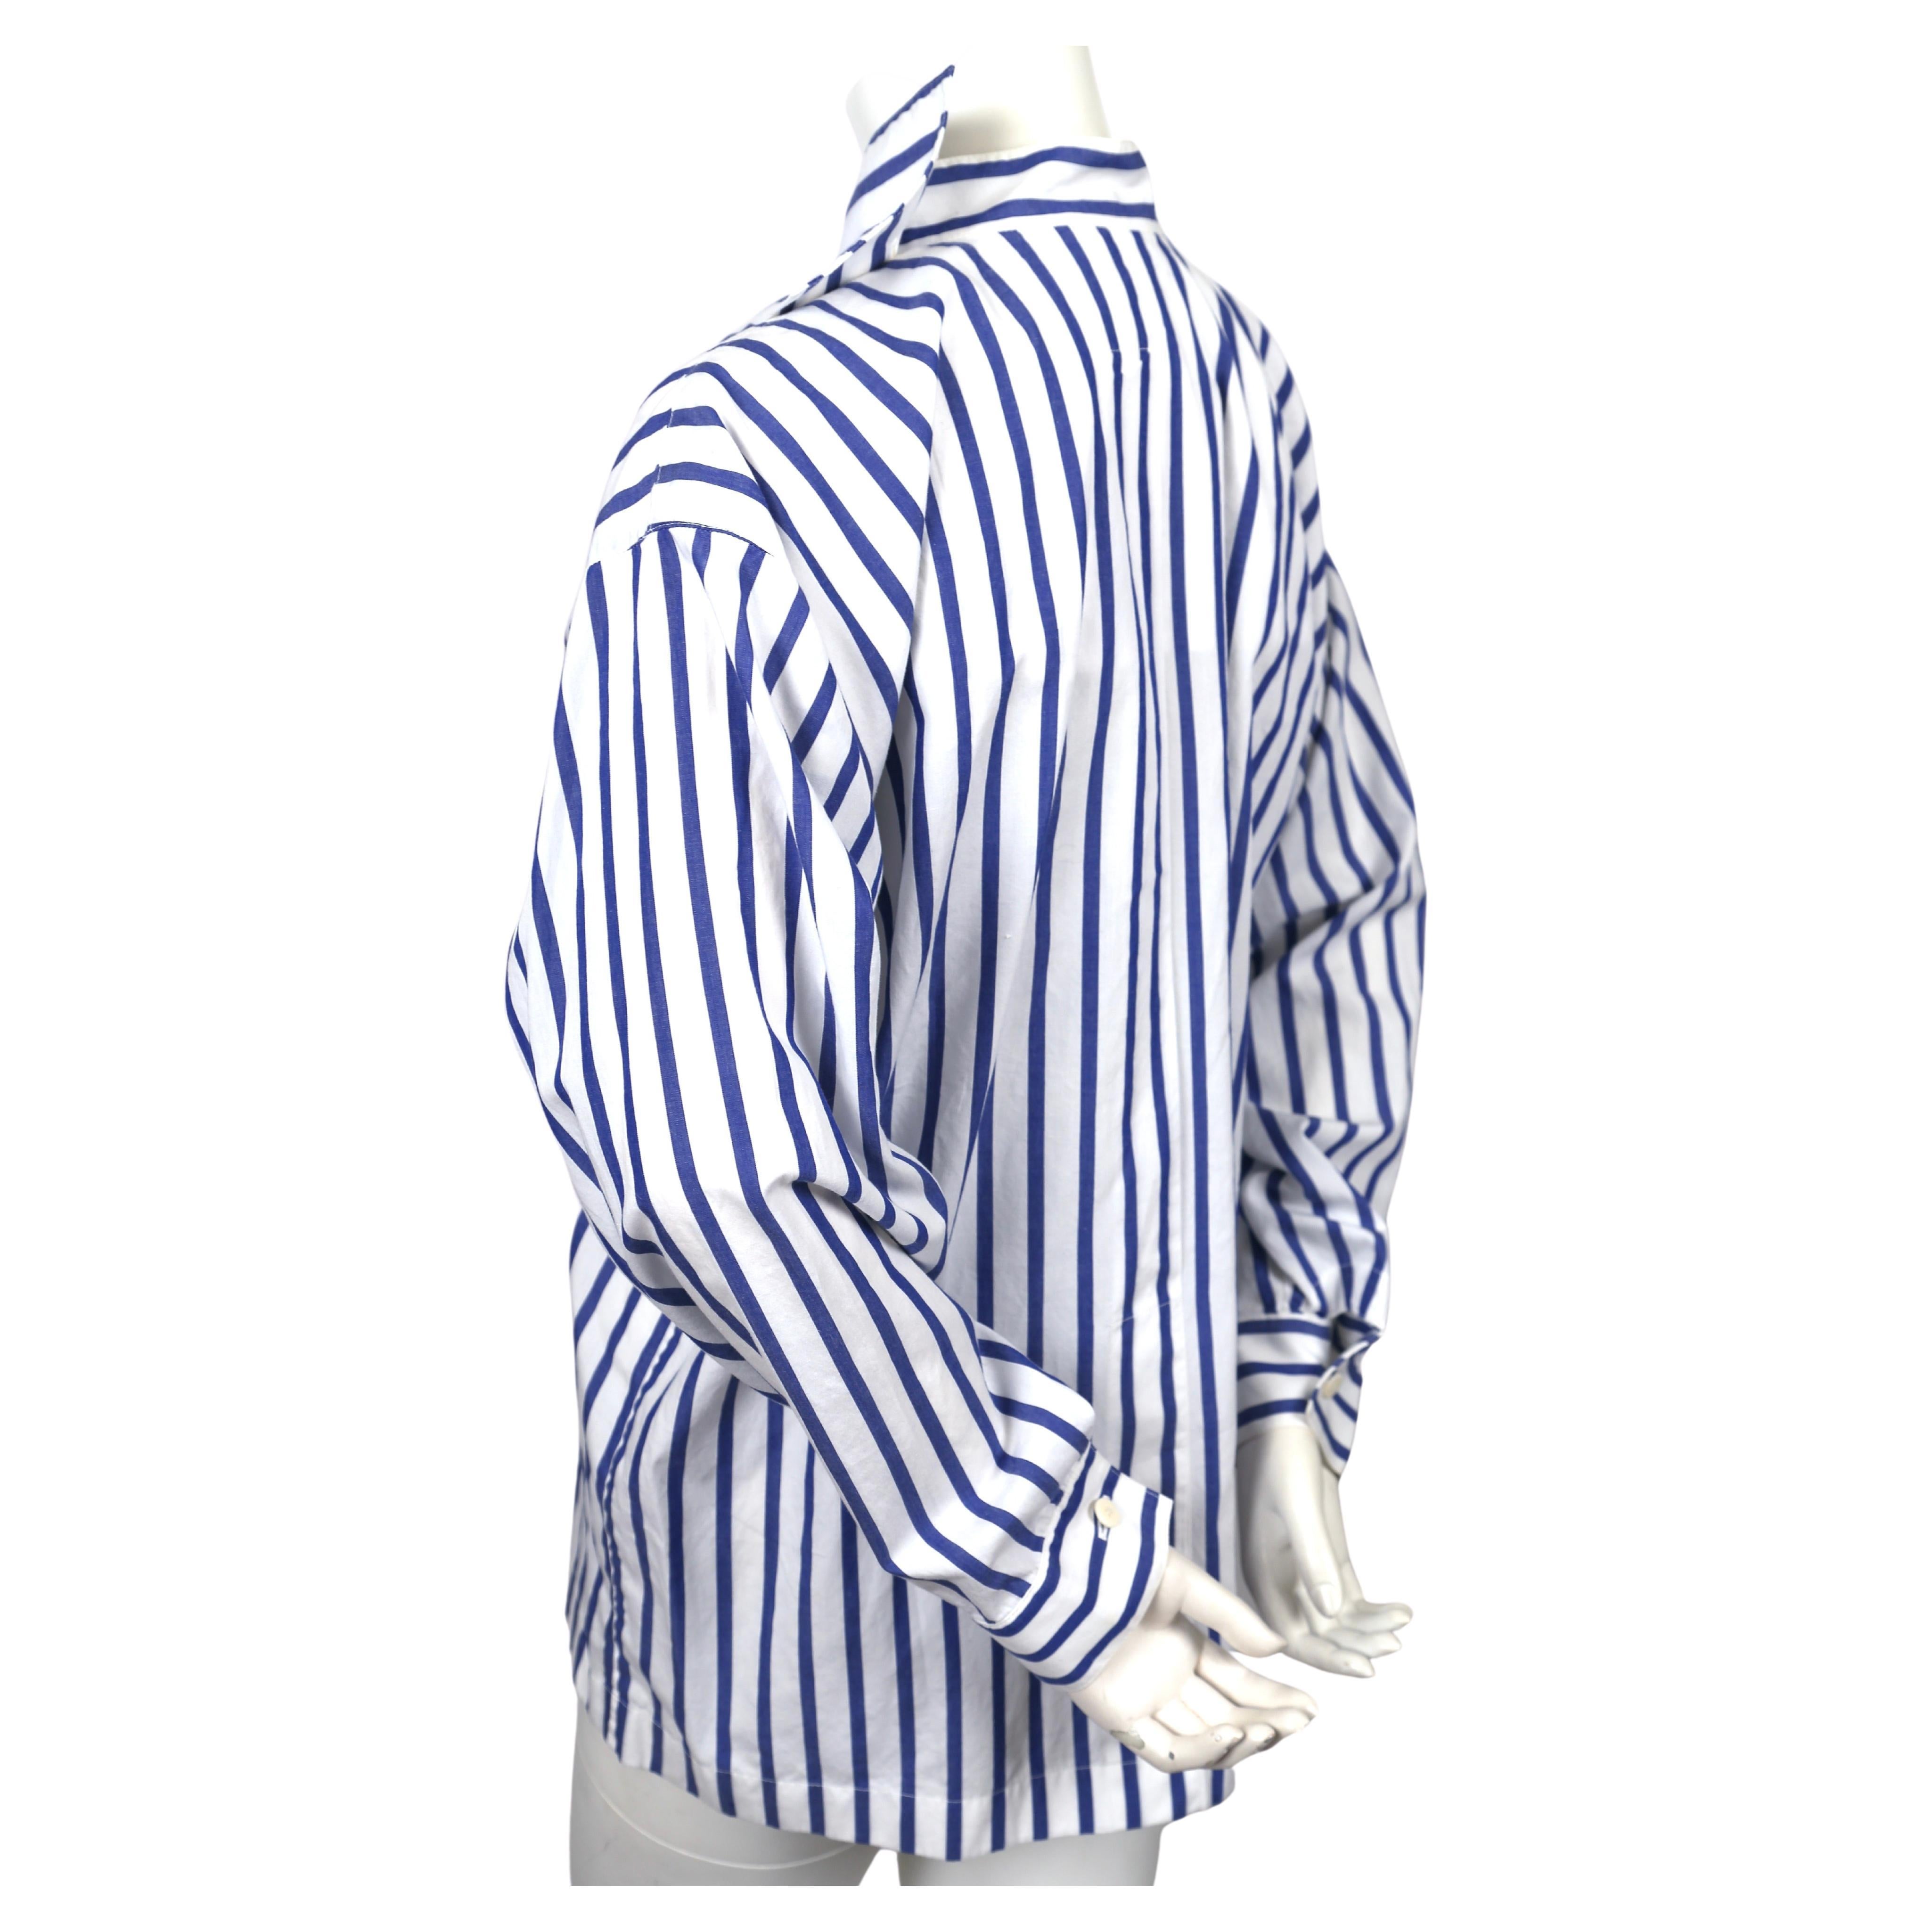 1980's ISSEY MIYAKE blue and white striped cotton shirt with draped neckline For Sale 1